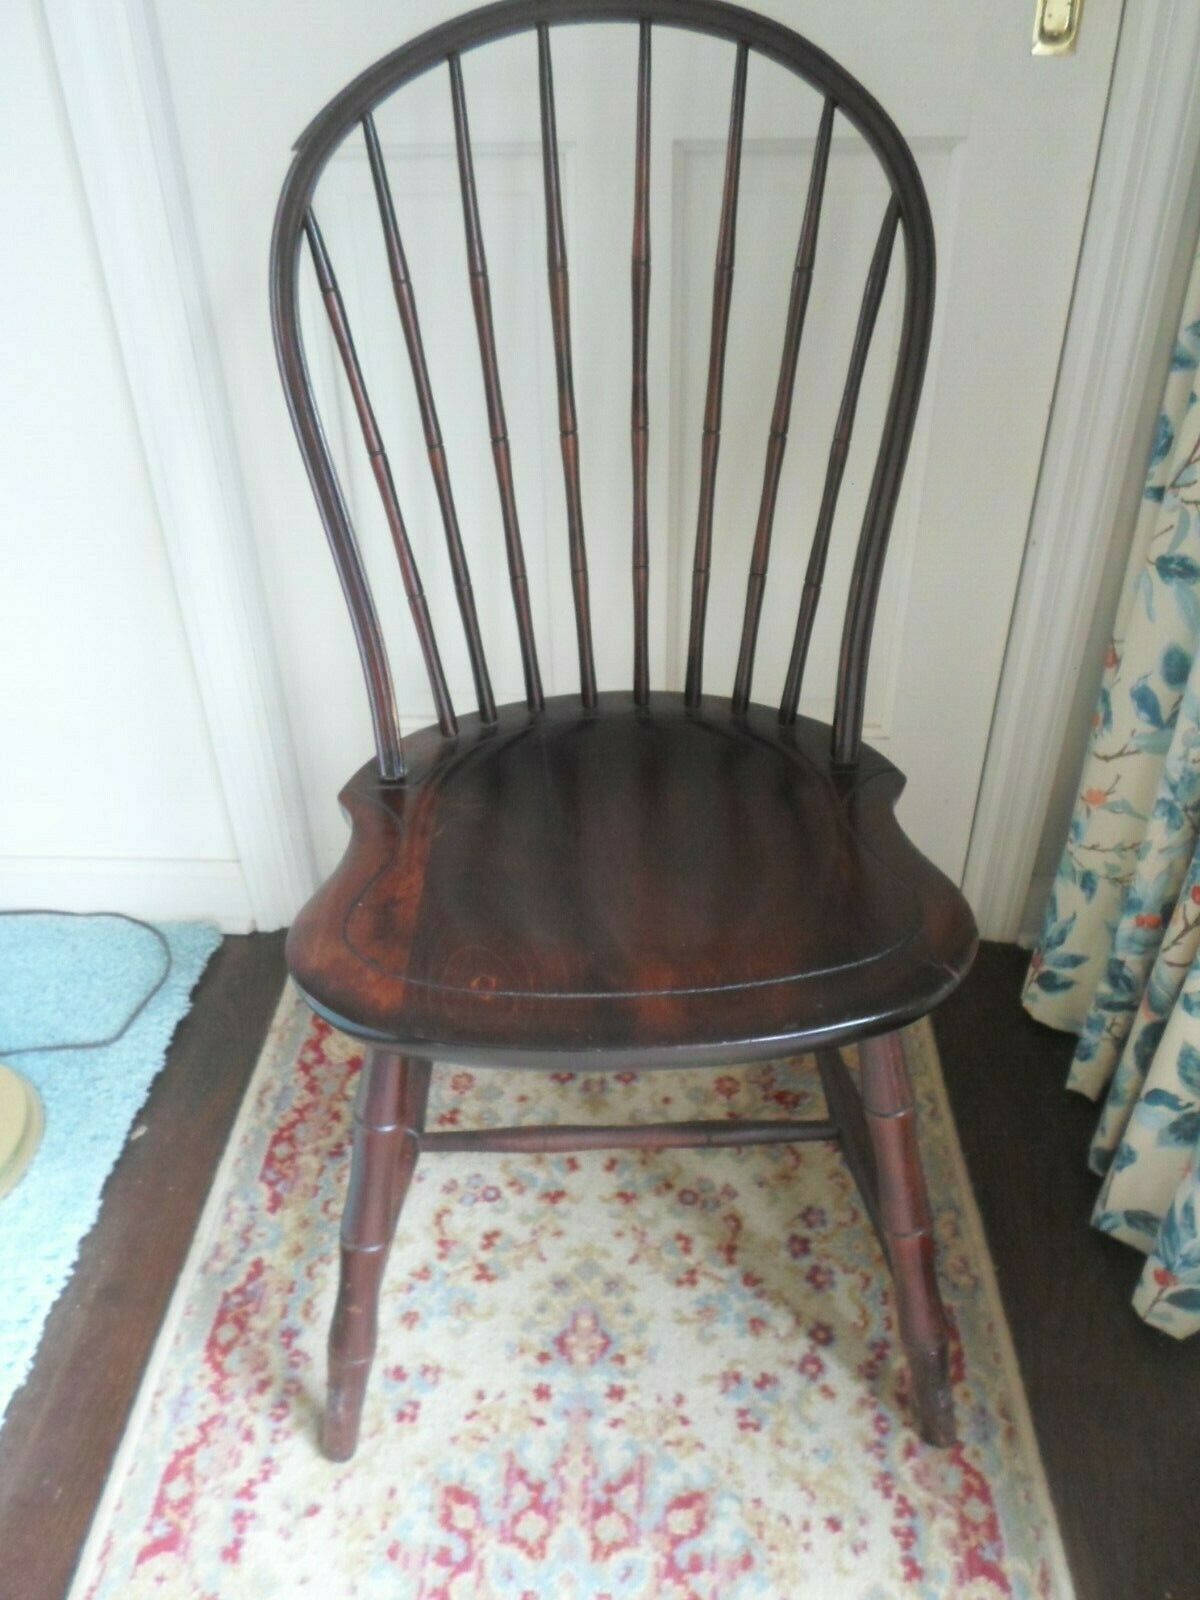 Antique Valuations: VINTAGE SIDE CHAIR BY NICHOLS AND STONE. MAHOGANY FINISH